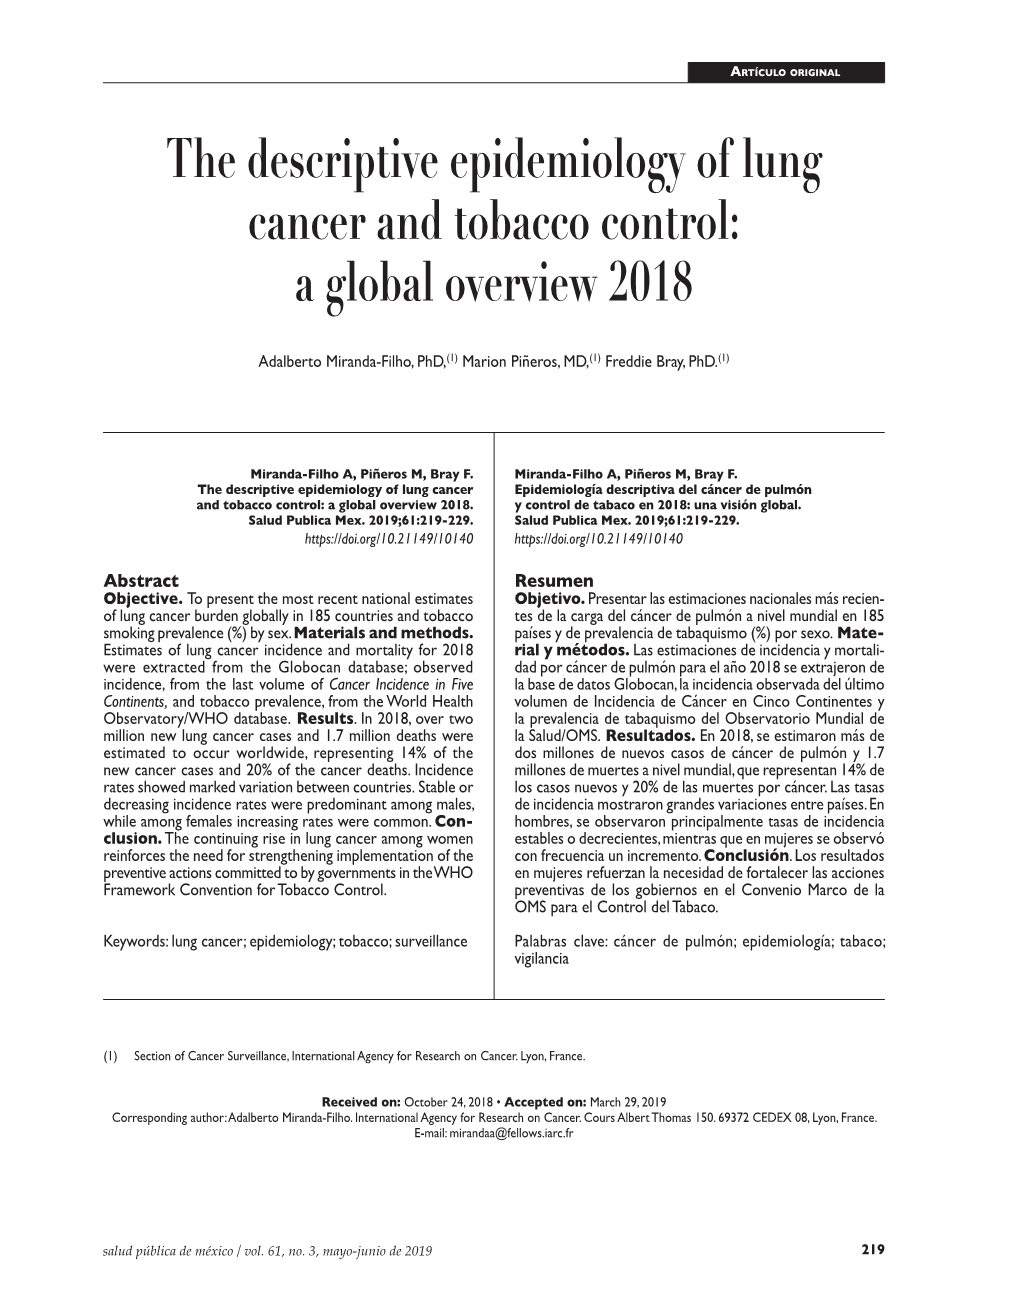 The Descriptive Epidemiology of Lung Cancer and Tobacco Control: a Global Overview 2018